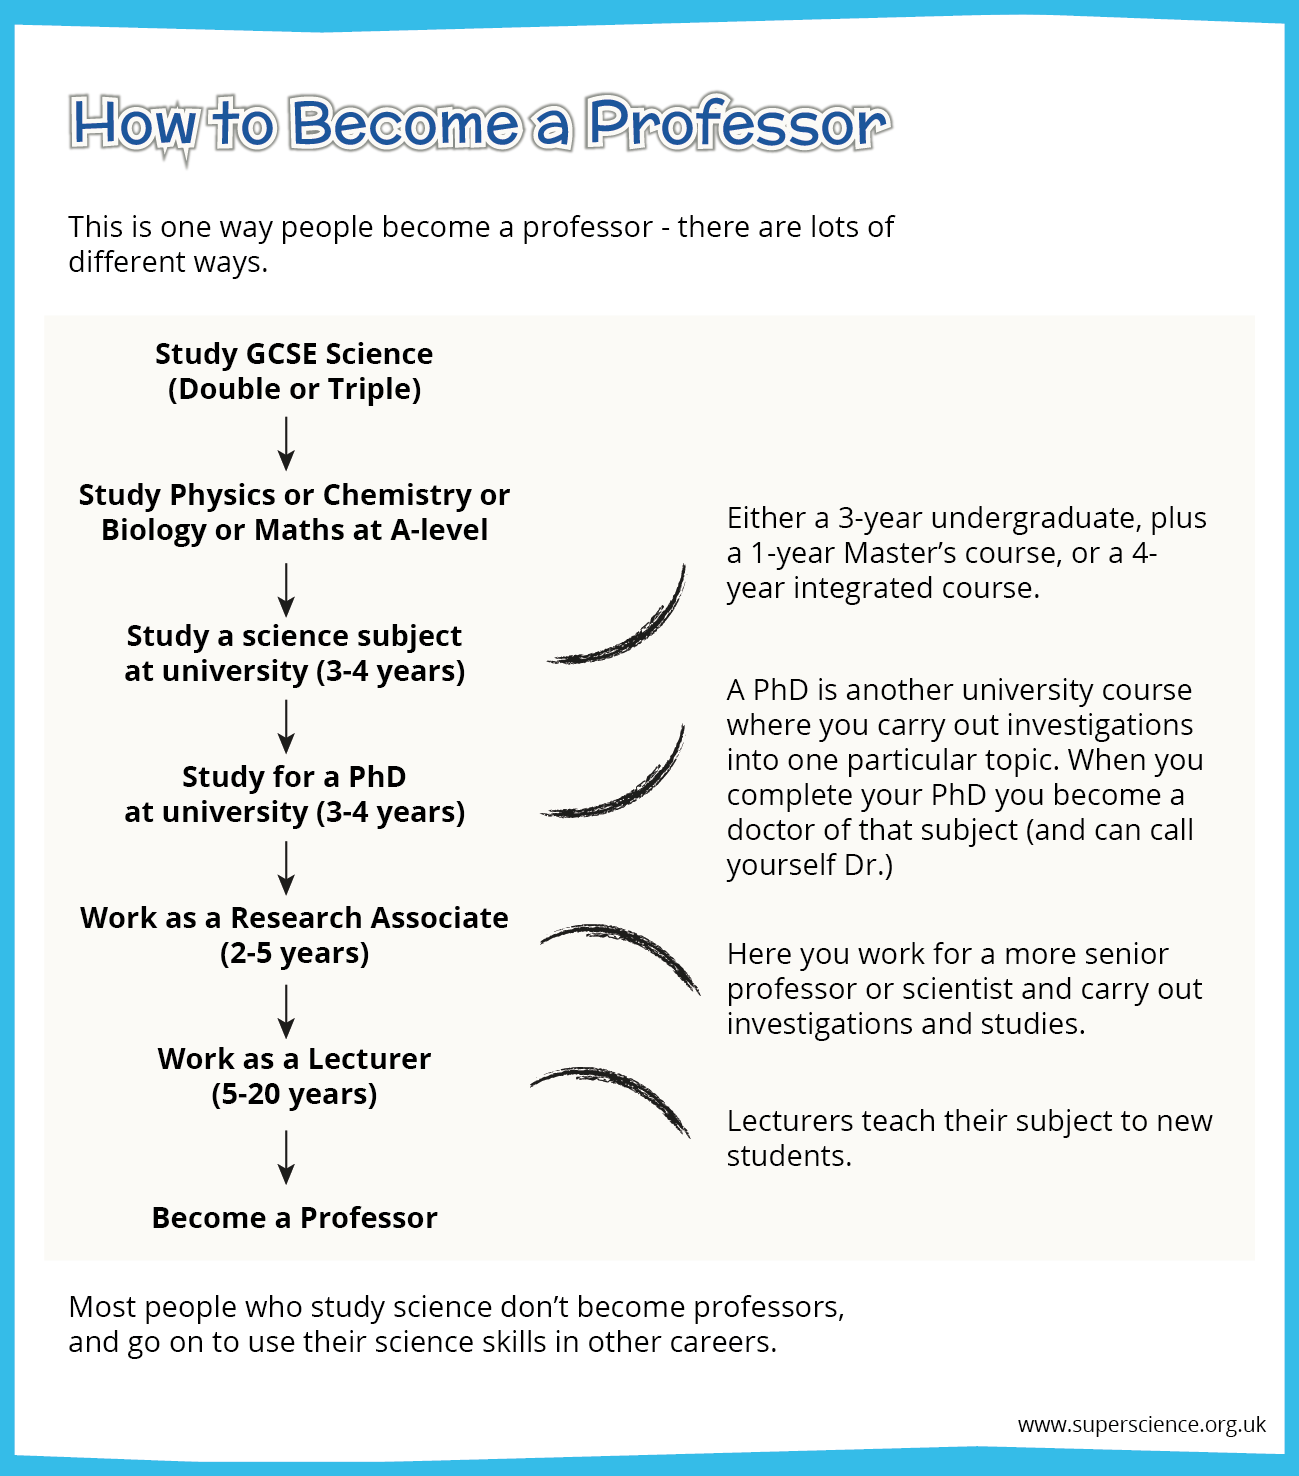 Graphic showing the steps from studying GCSE science to becoming a professor